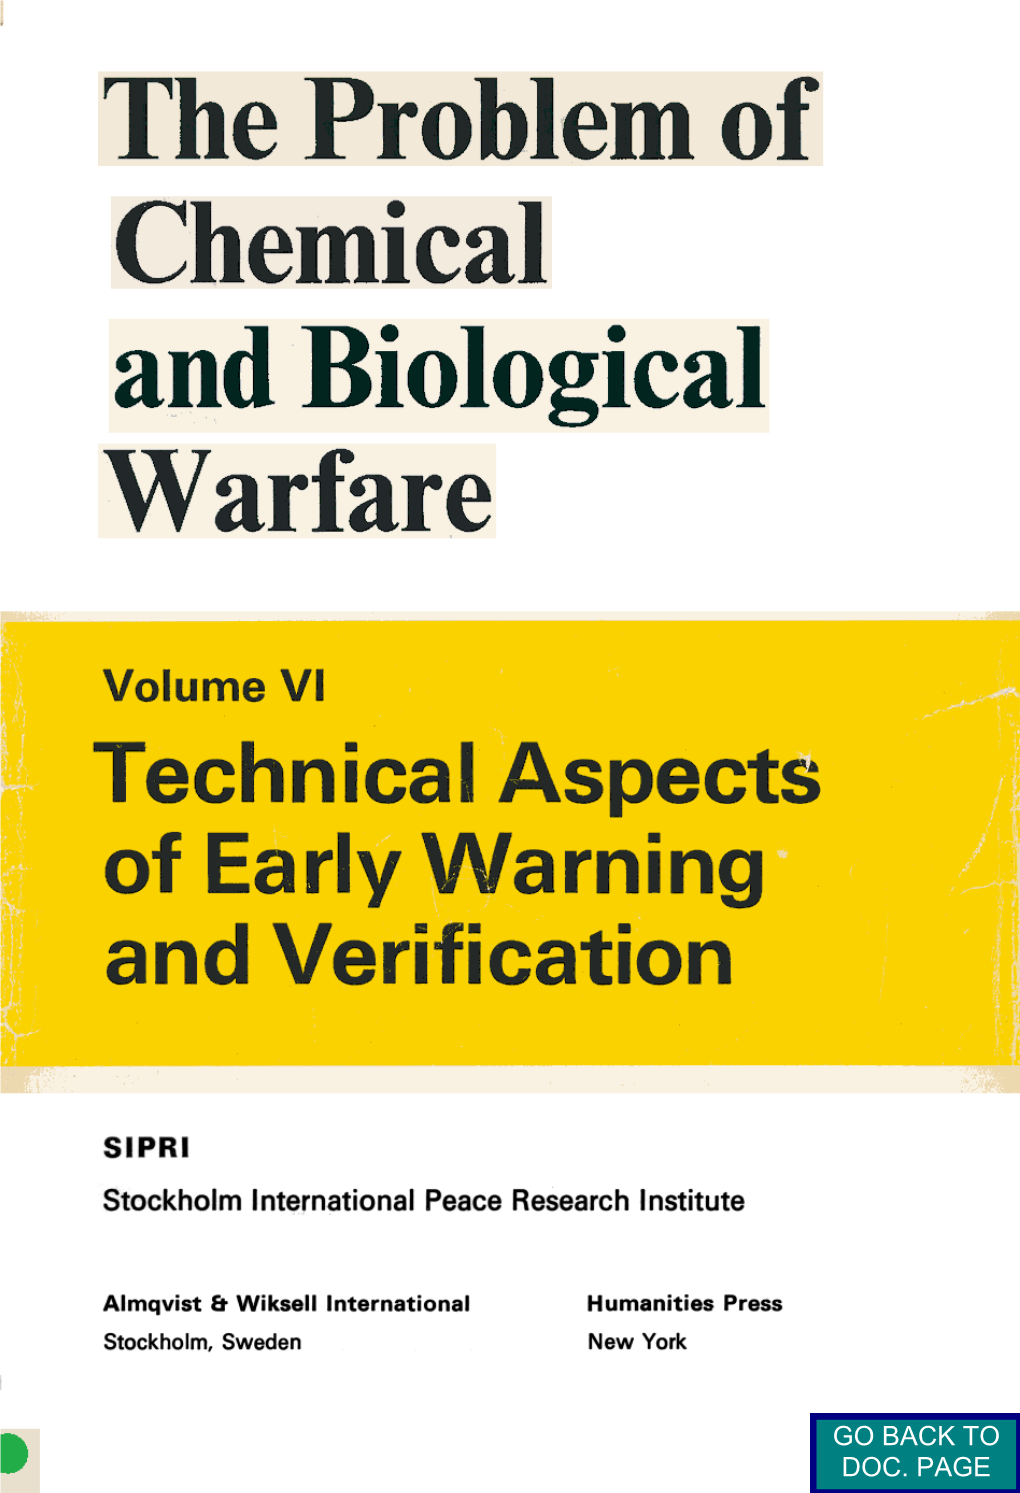 Volume VI, Technical Aspects of Early Warning and Verification